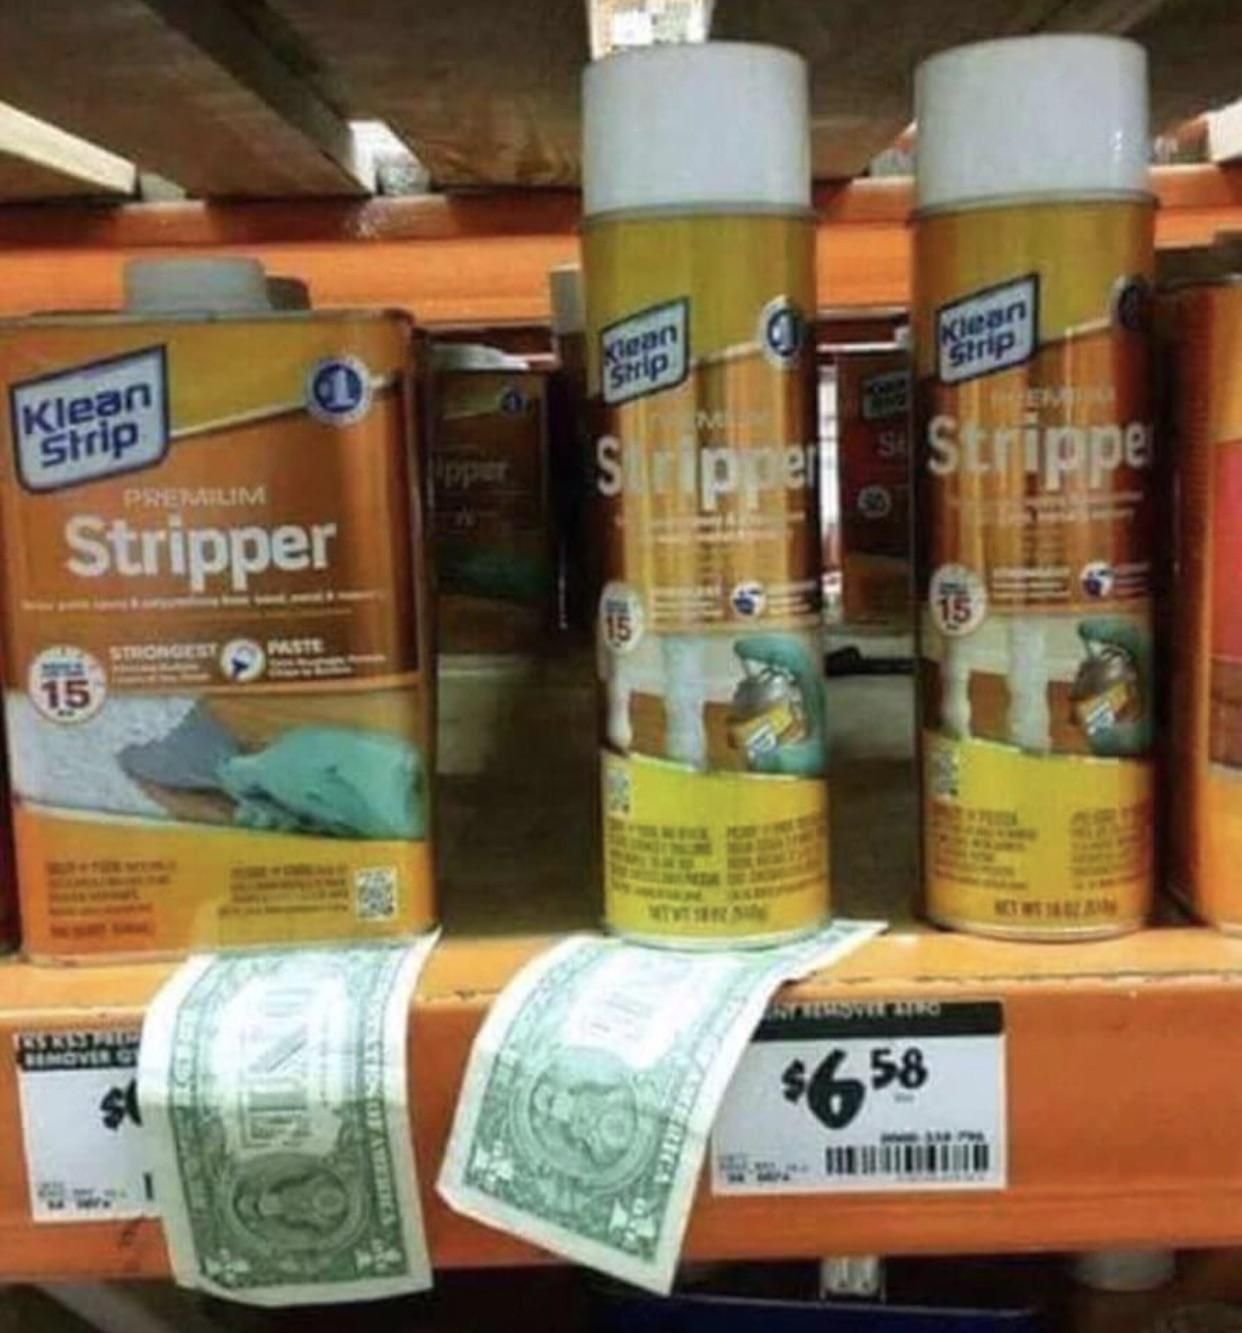 Strippers Found at Home Depot